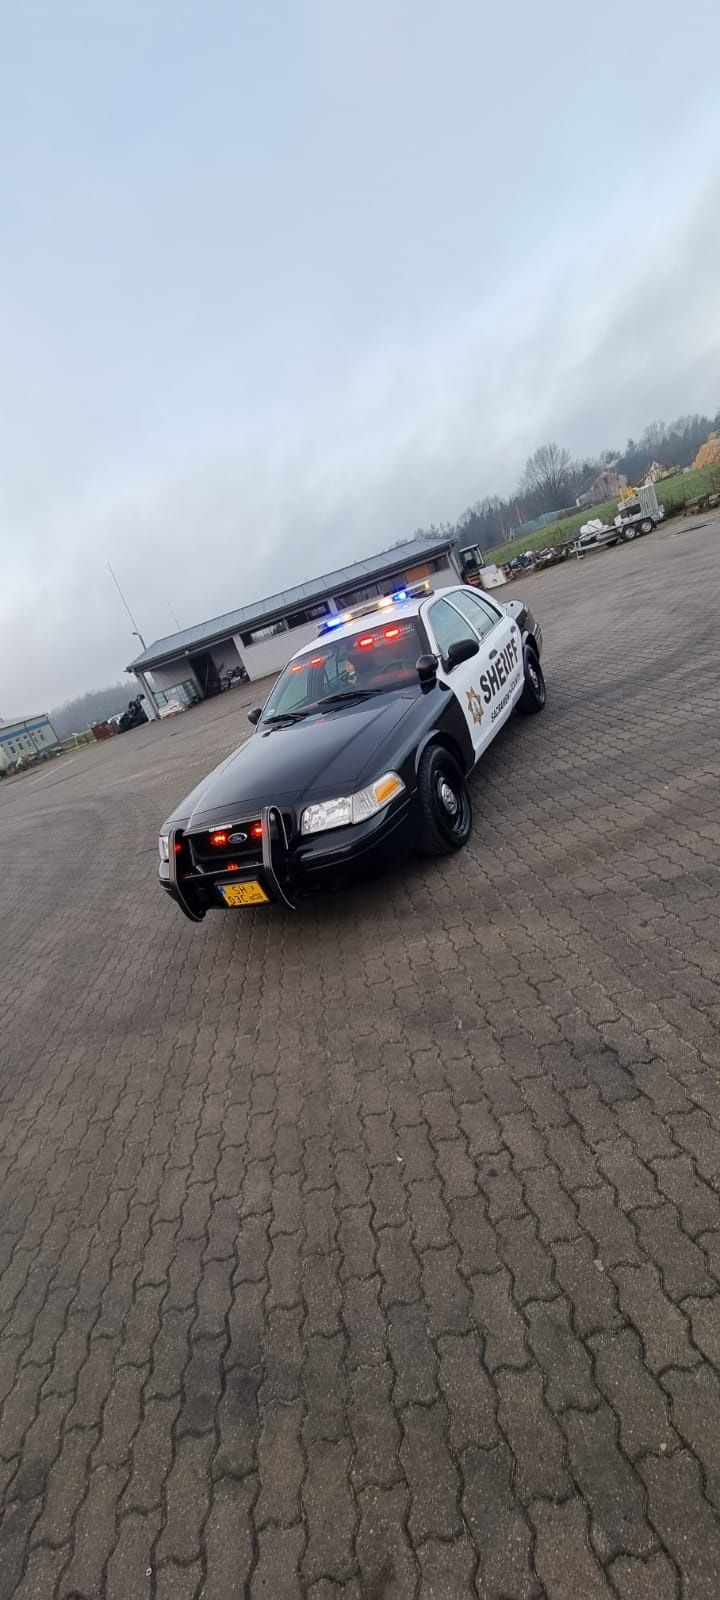 Ford Crown Victoria Police Inerceptor